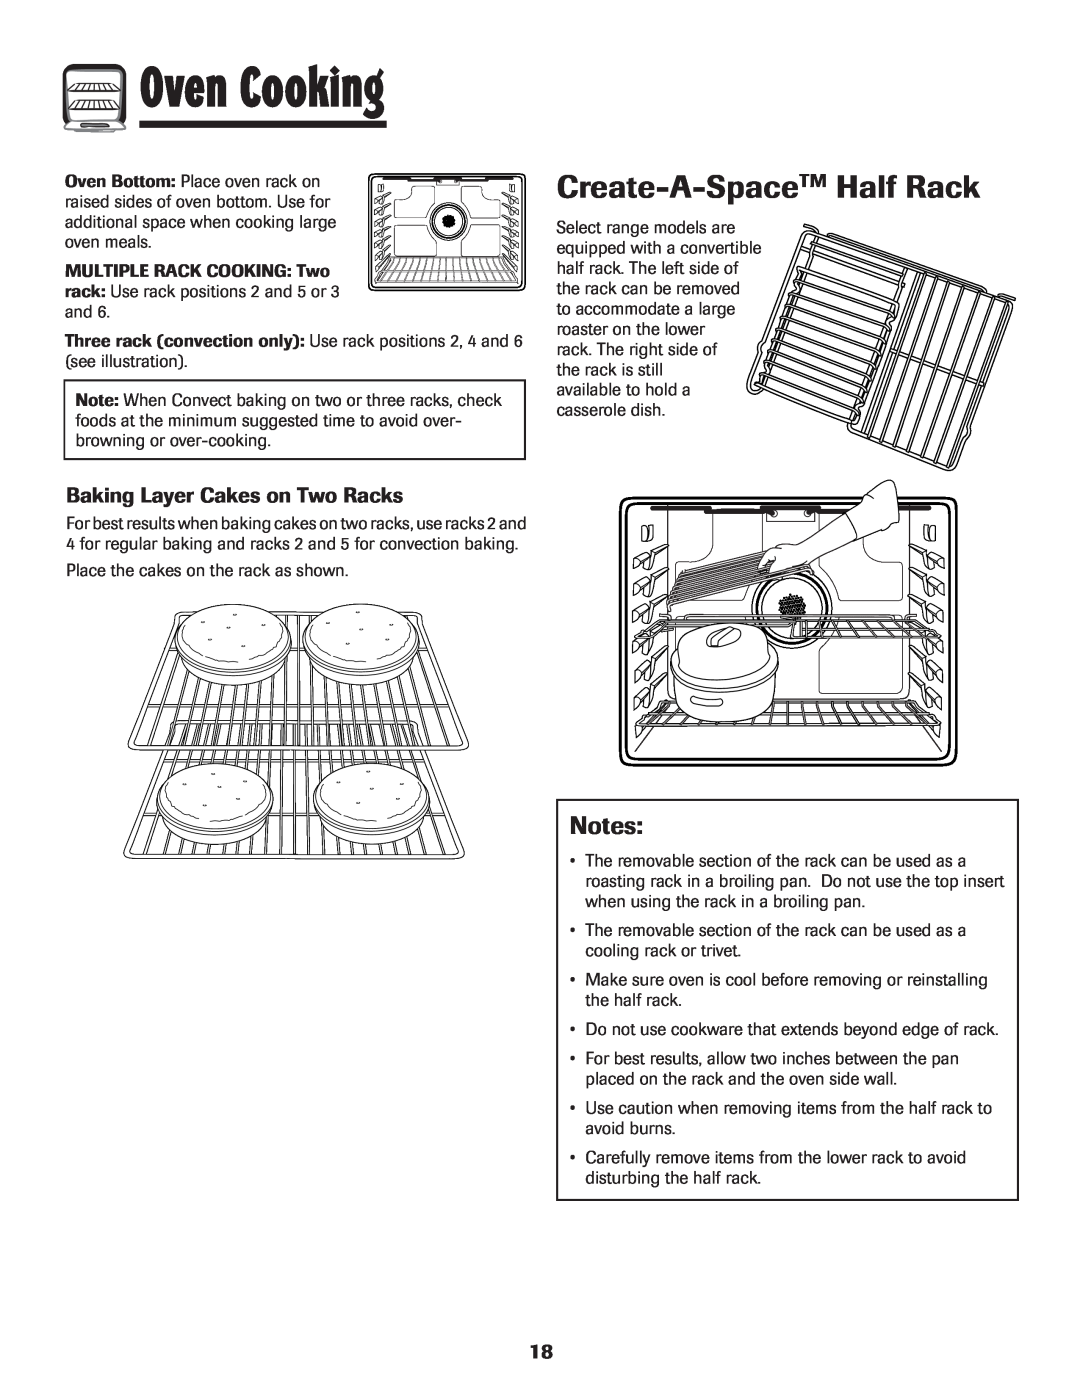 Maytag MER5875RAF manual Create-A-SpaceTM Half Rack, Baking Layer Cakes on Two Racks, Oven Cooking 